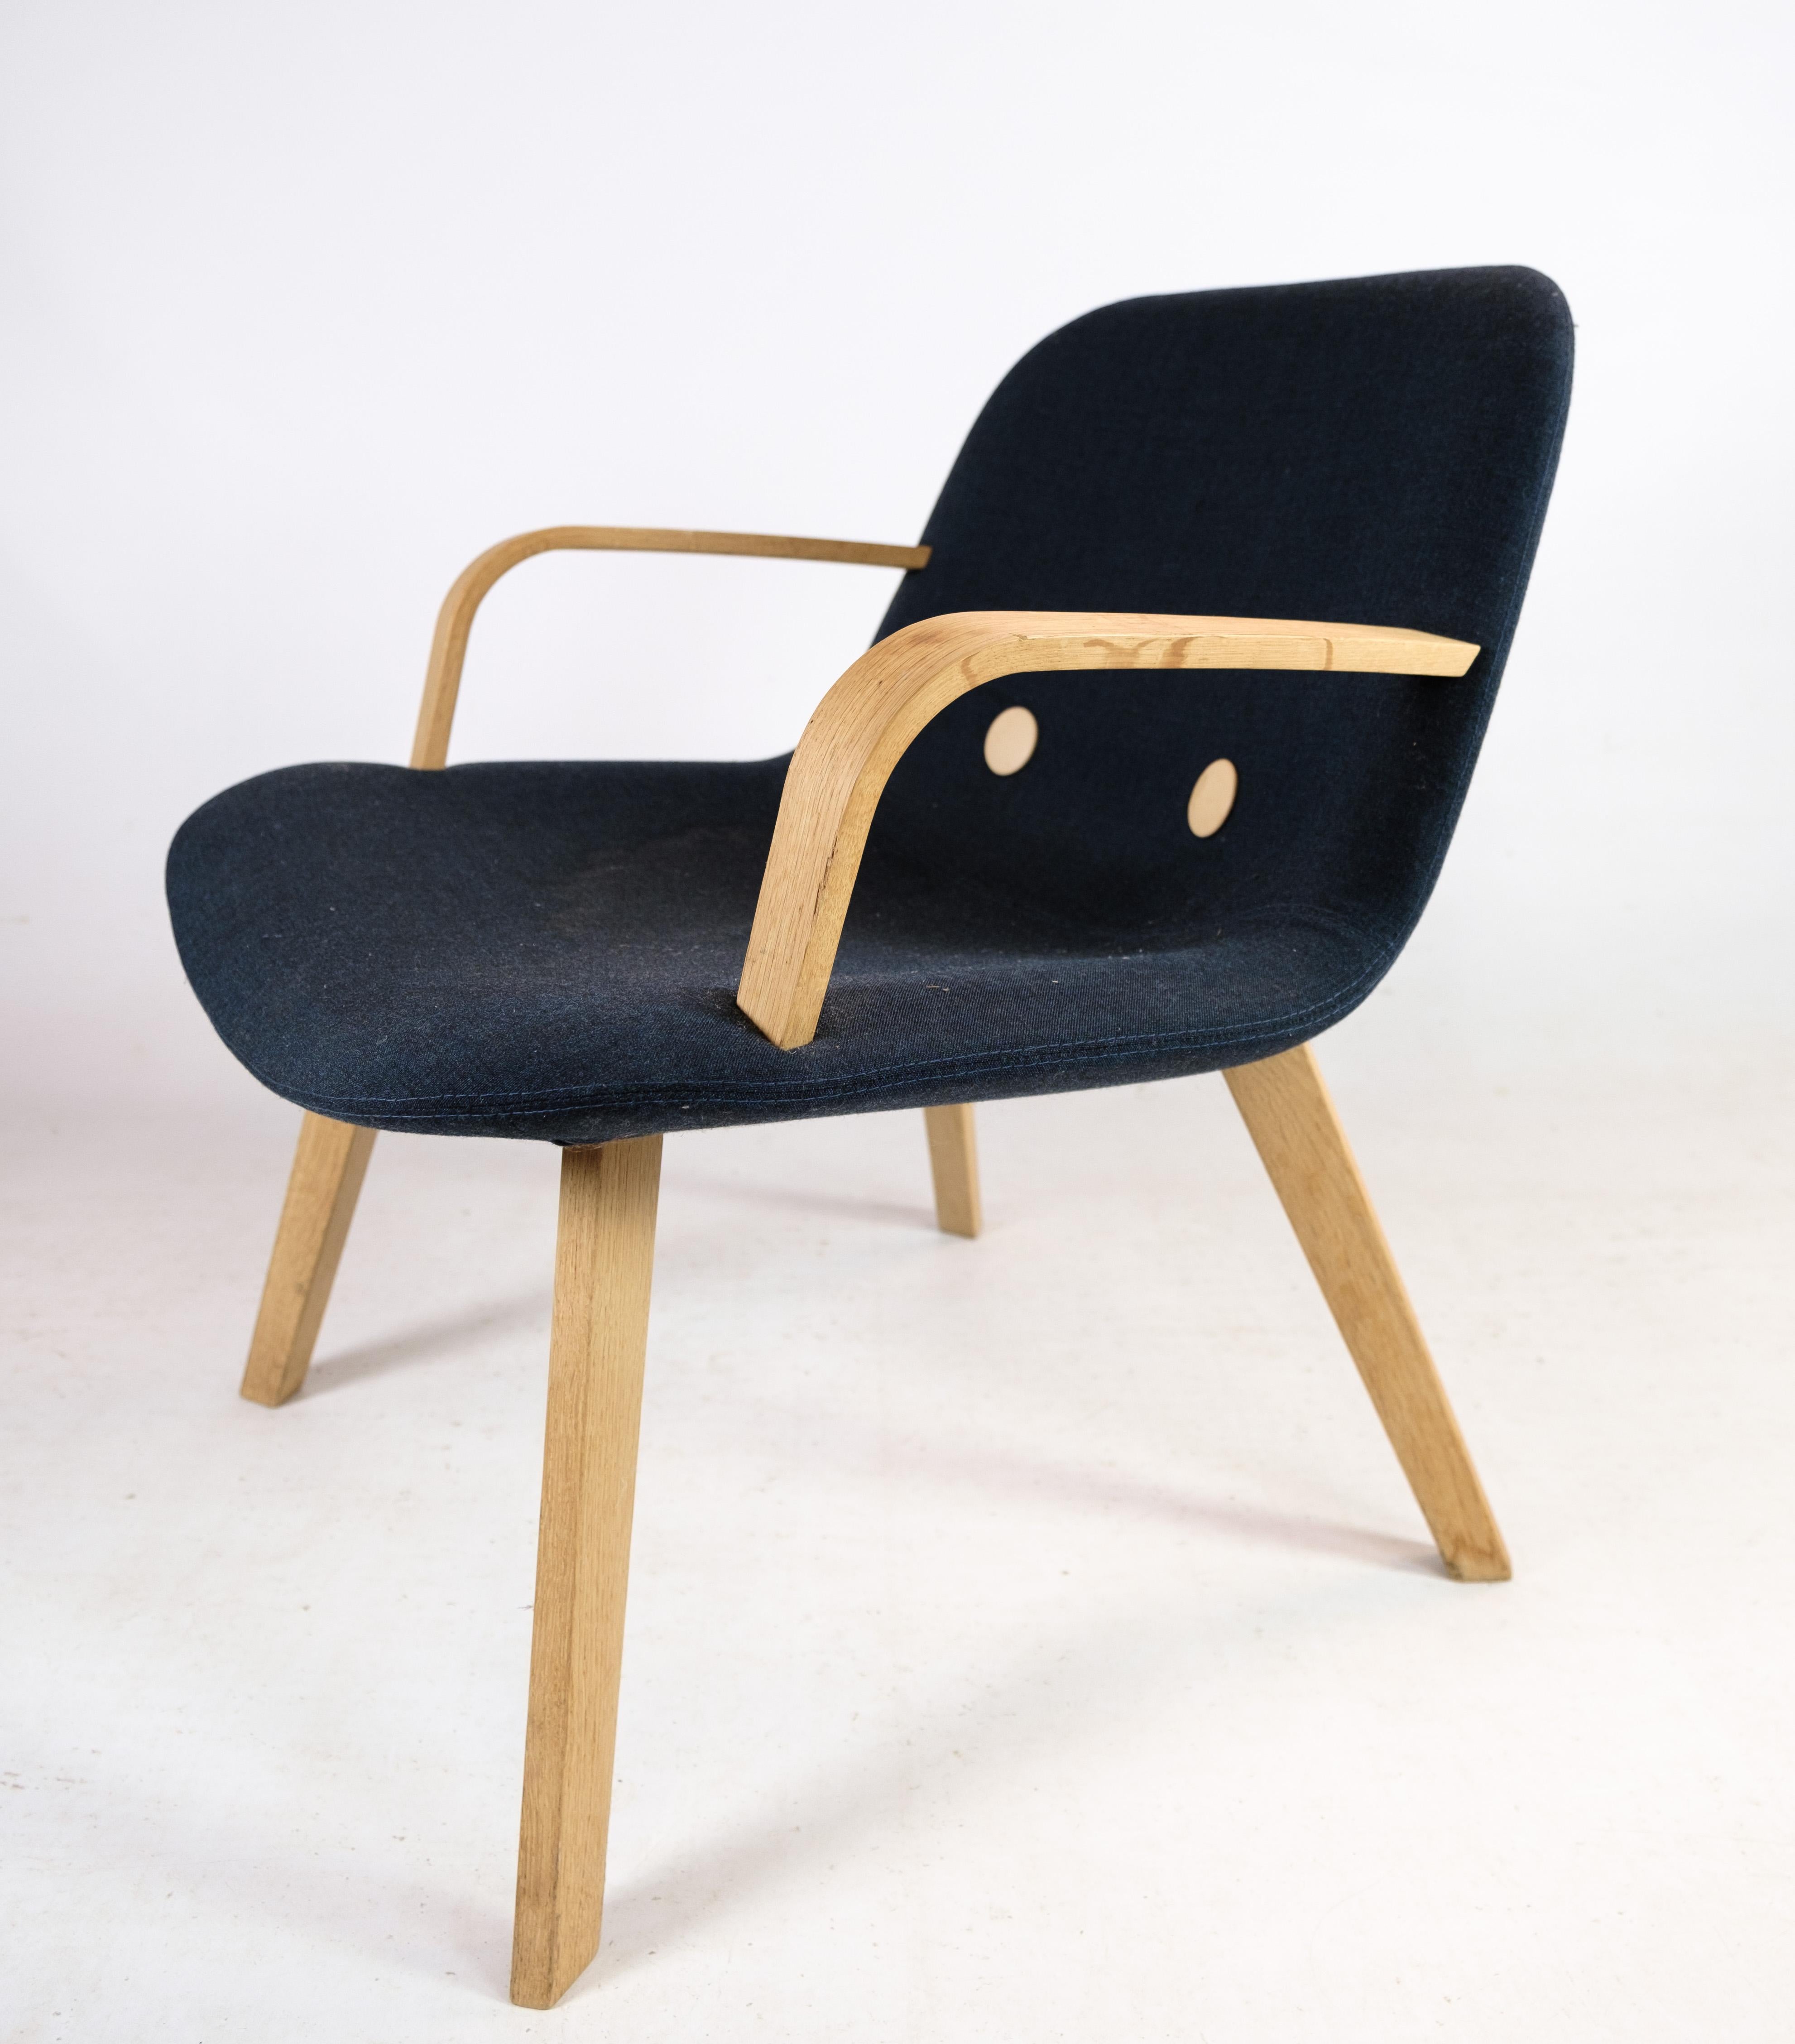 Fabric Lounge Chair Model Ej 3 By Erik Jørgensen From 1990s For Sale